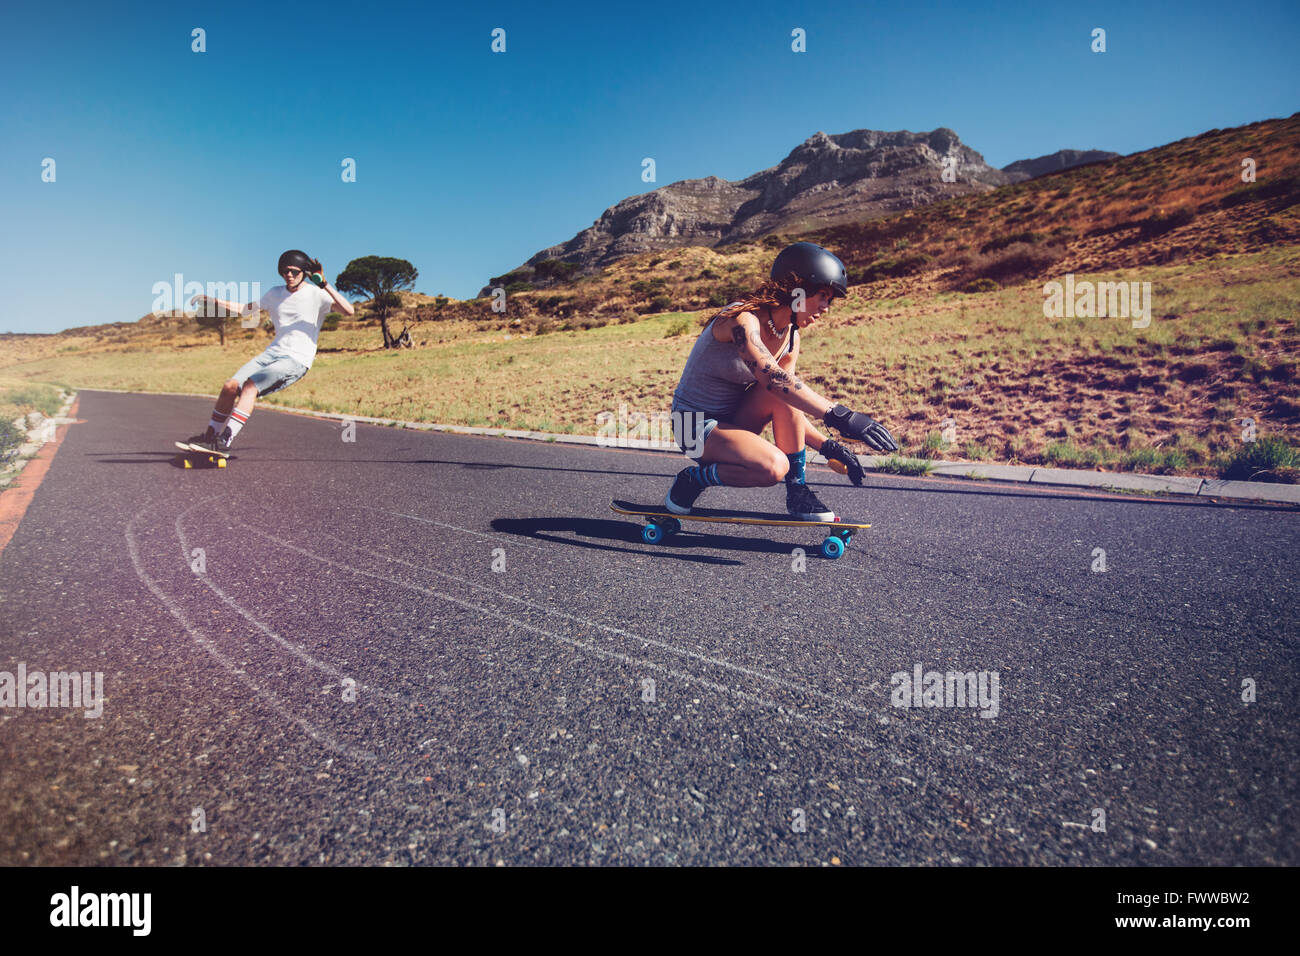 Two young people practicing long board riding outdoors on rural road. Man and woman longboarding on a summer day. Stock Photo